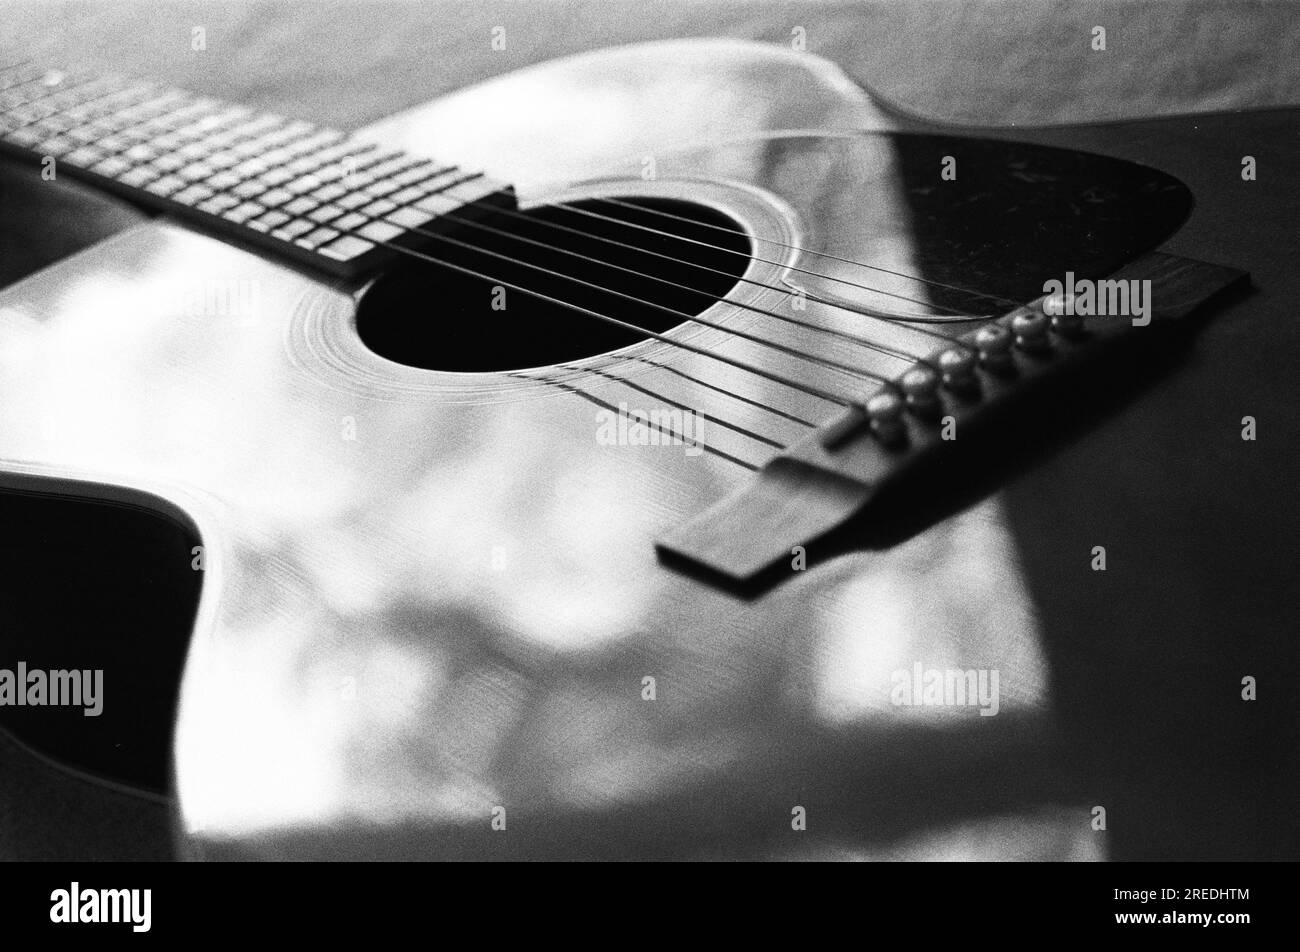 Acoustic guitar photographed on 35mm film Stock Photo